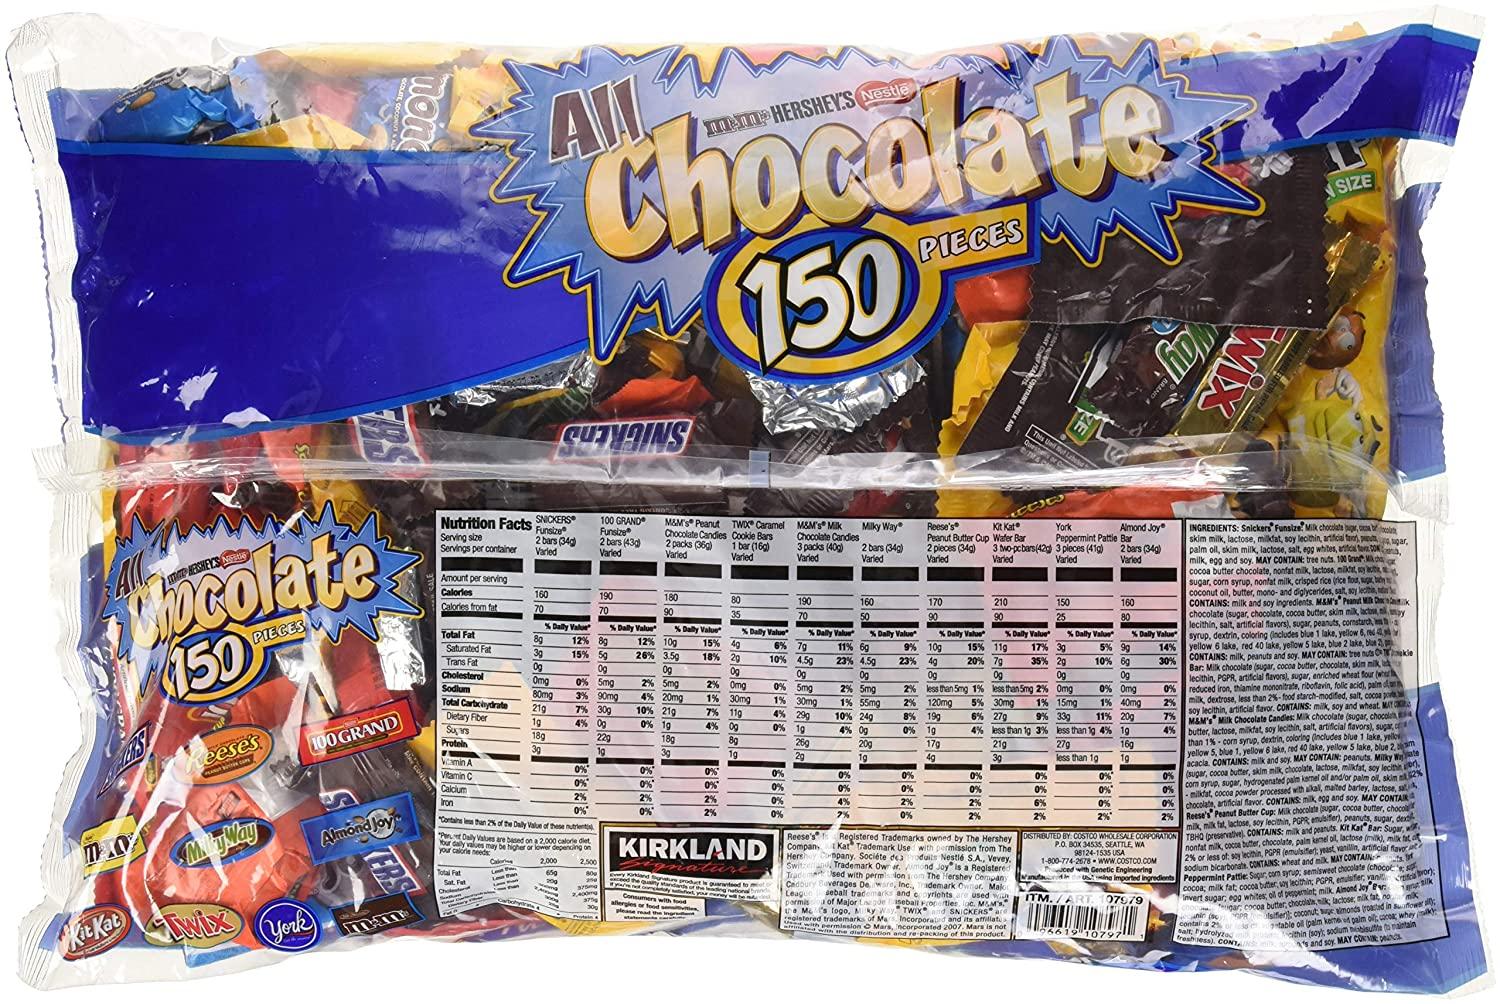 Hershey's All Chocolate Pieces, 150 Pcs, 90 Ounce Bag